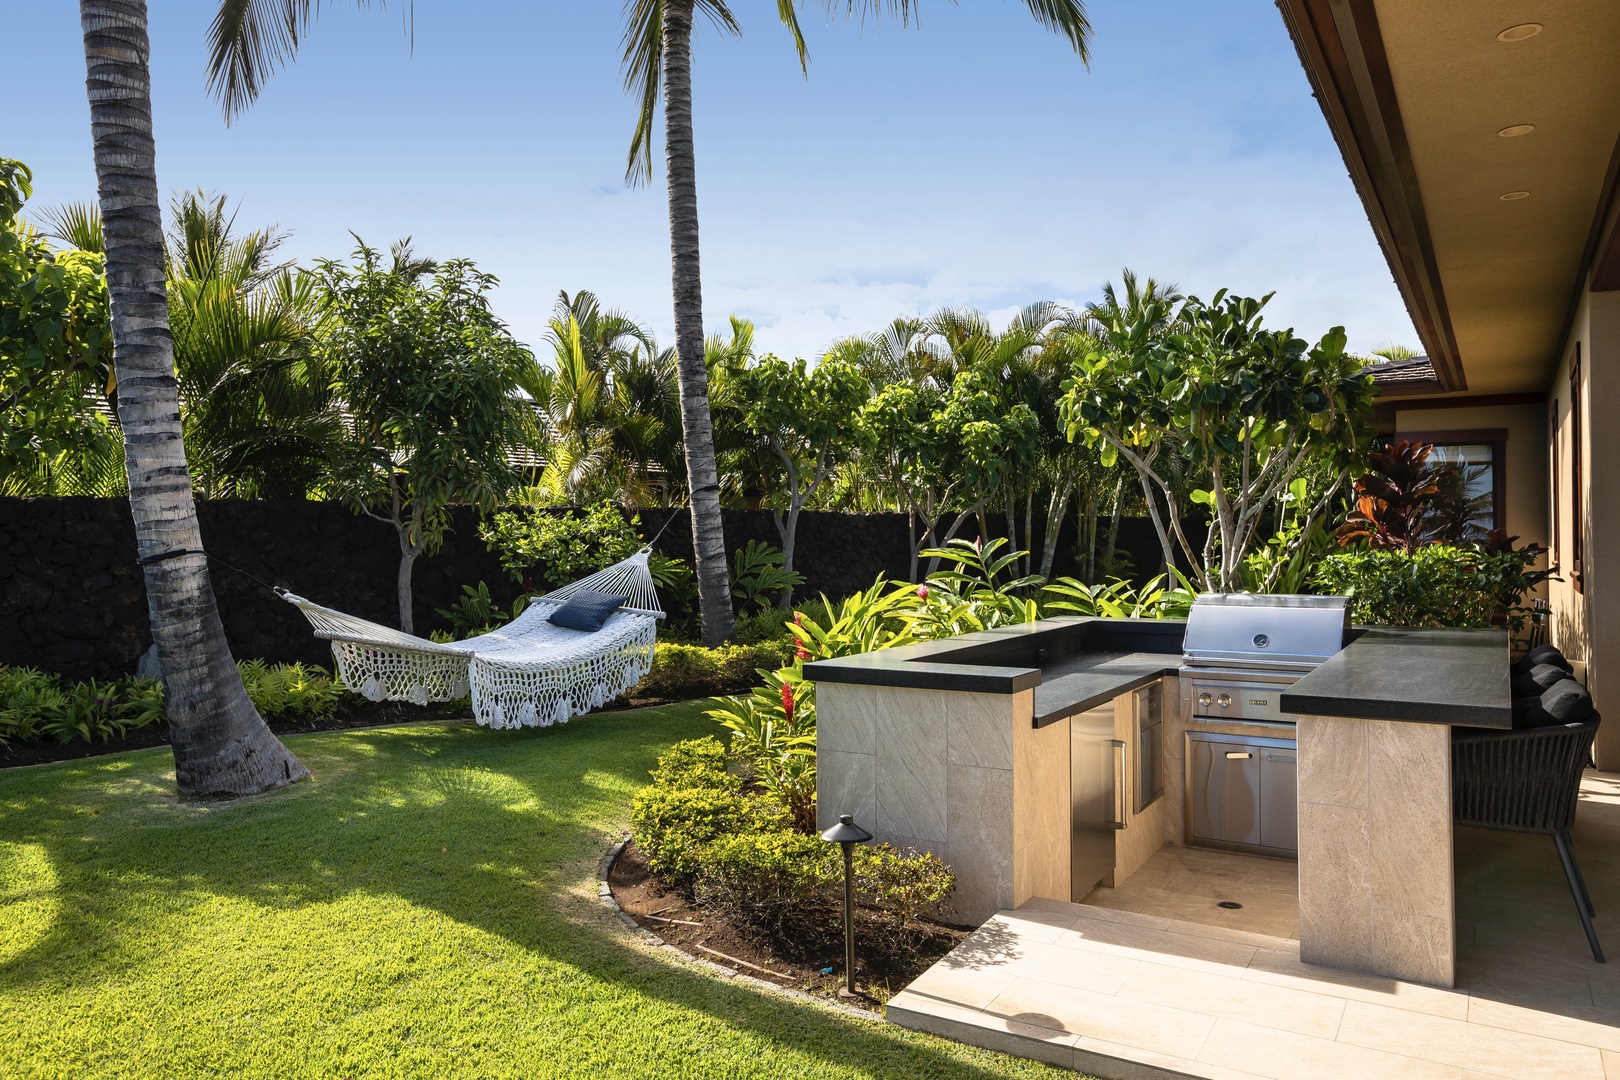 Kailua Kona Vacation Rentals, 4BD Kulanakauhale (3558) Estate Home at Four Seasons Resort at Hualalai - BBQ grill area with ample prep space and mini fridge, with grassy private yard and hammock beyond.